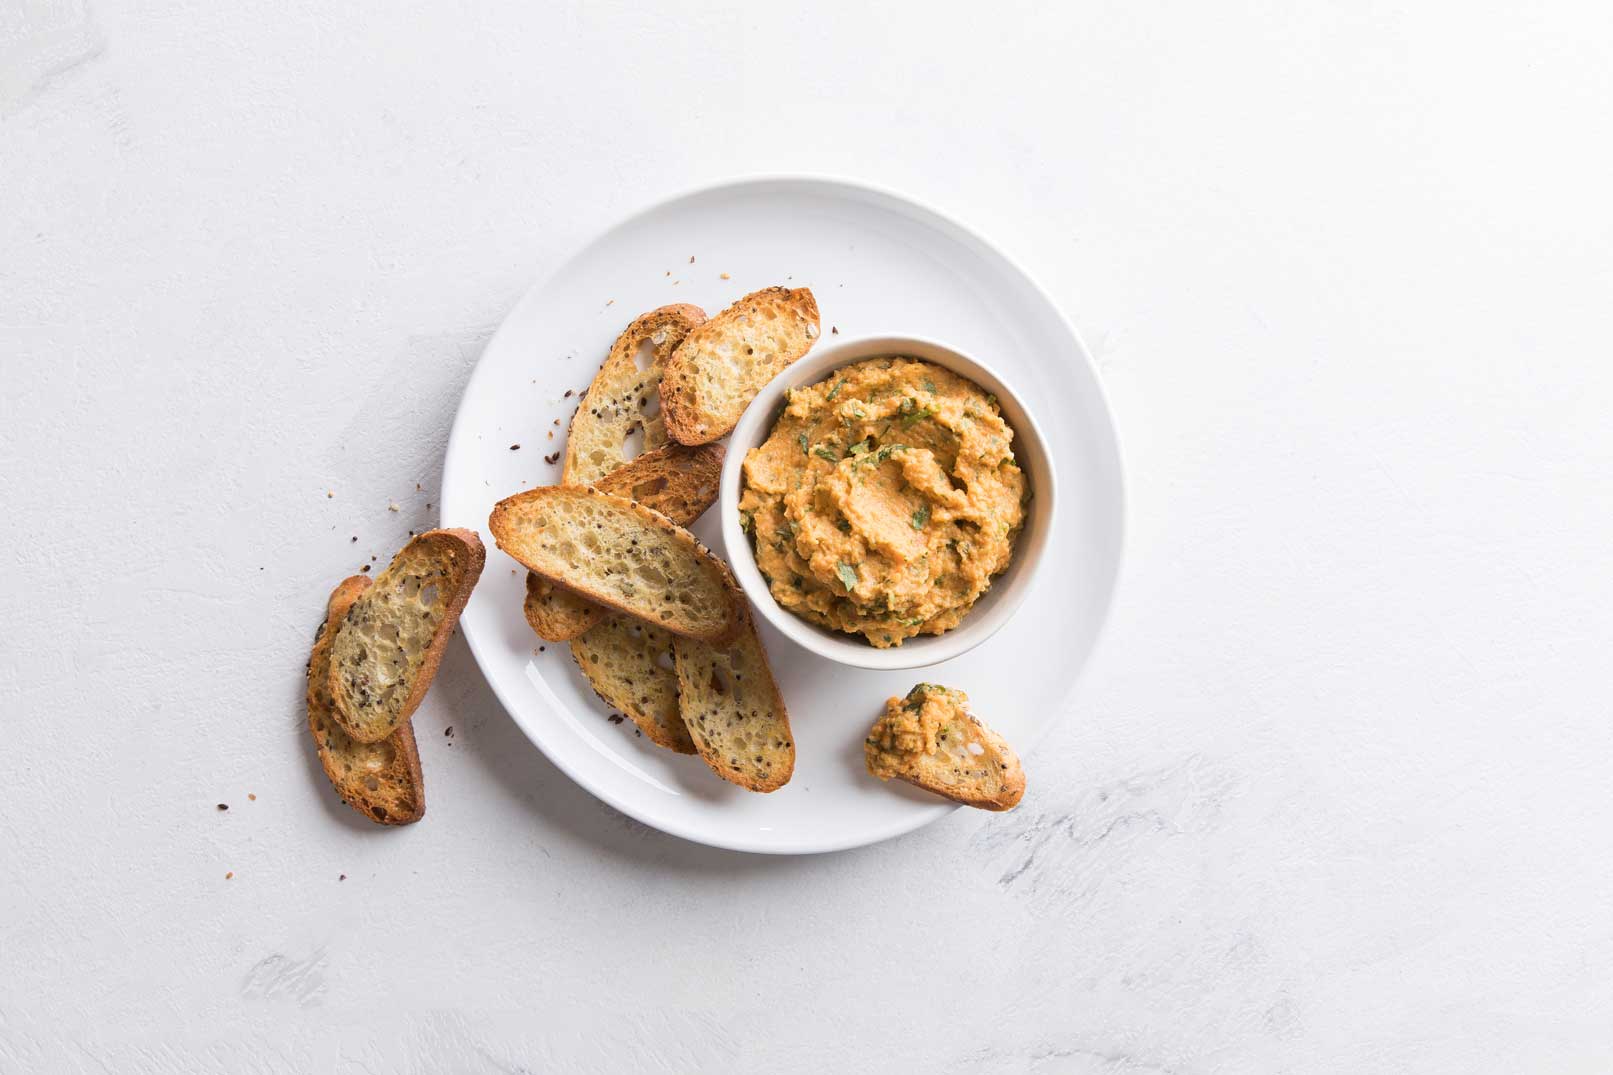 Carrot and ricotta dip in a small white bowl served on a white plate with baked bread slices for serving.